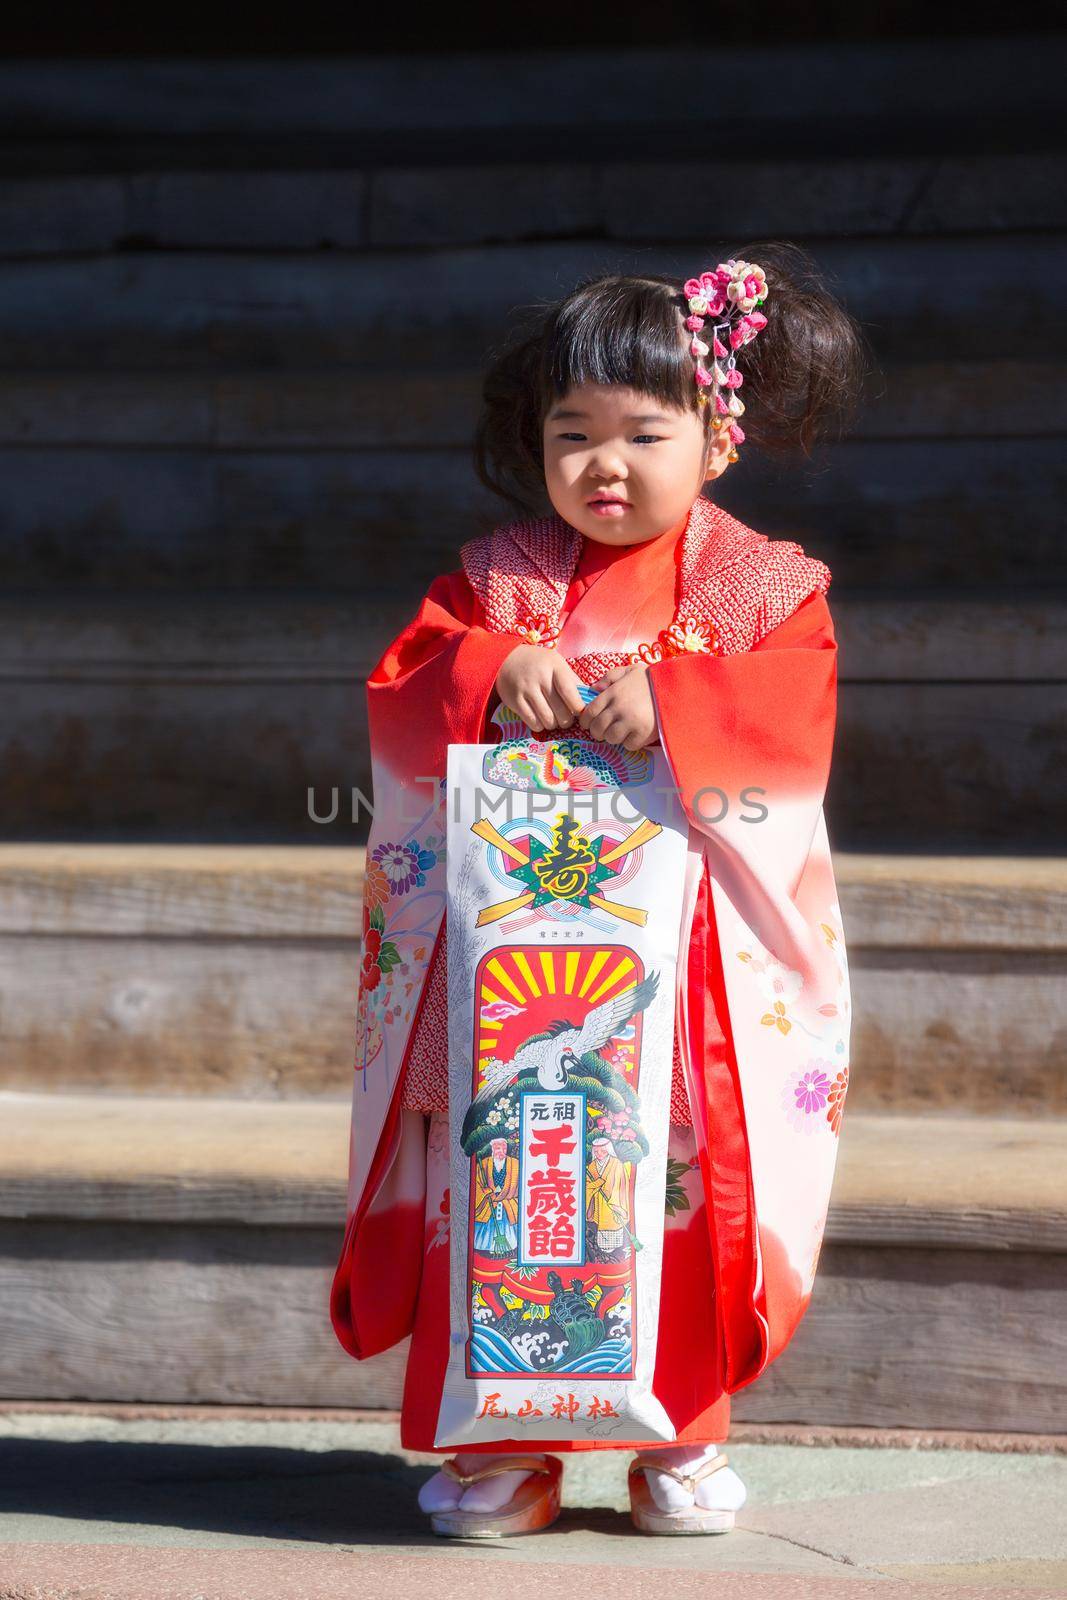 Kanazawa, Japan - November 15, 2018: Japanese girl with gift posing during Shichi-Go-San day at Oyama Jinja Shrine. Shichi-Go-Sun is annual festival day in Japan for 3, 5 and 7 years old children.